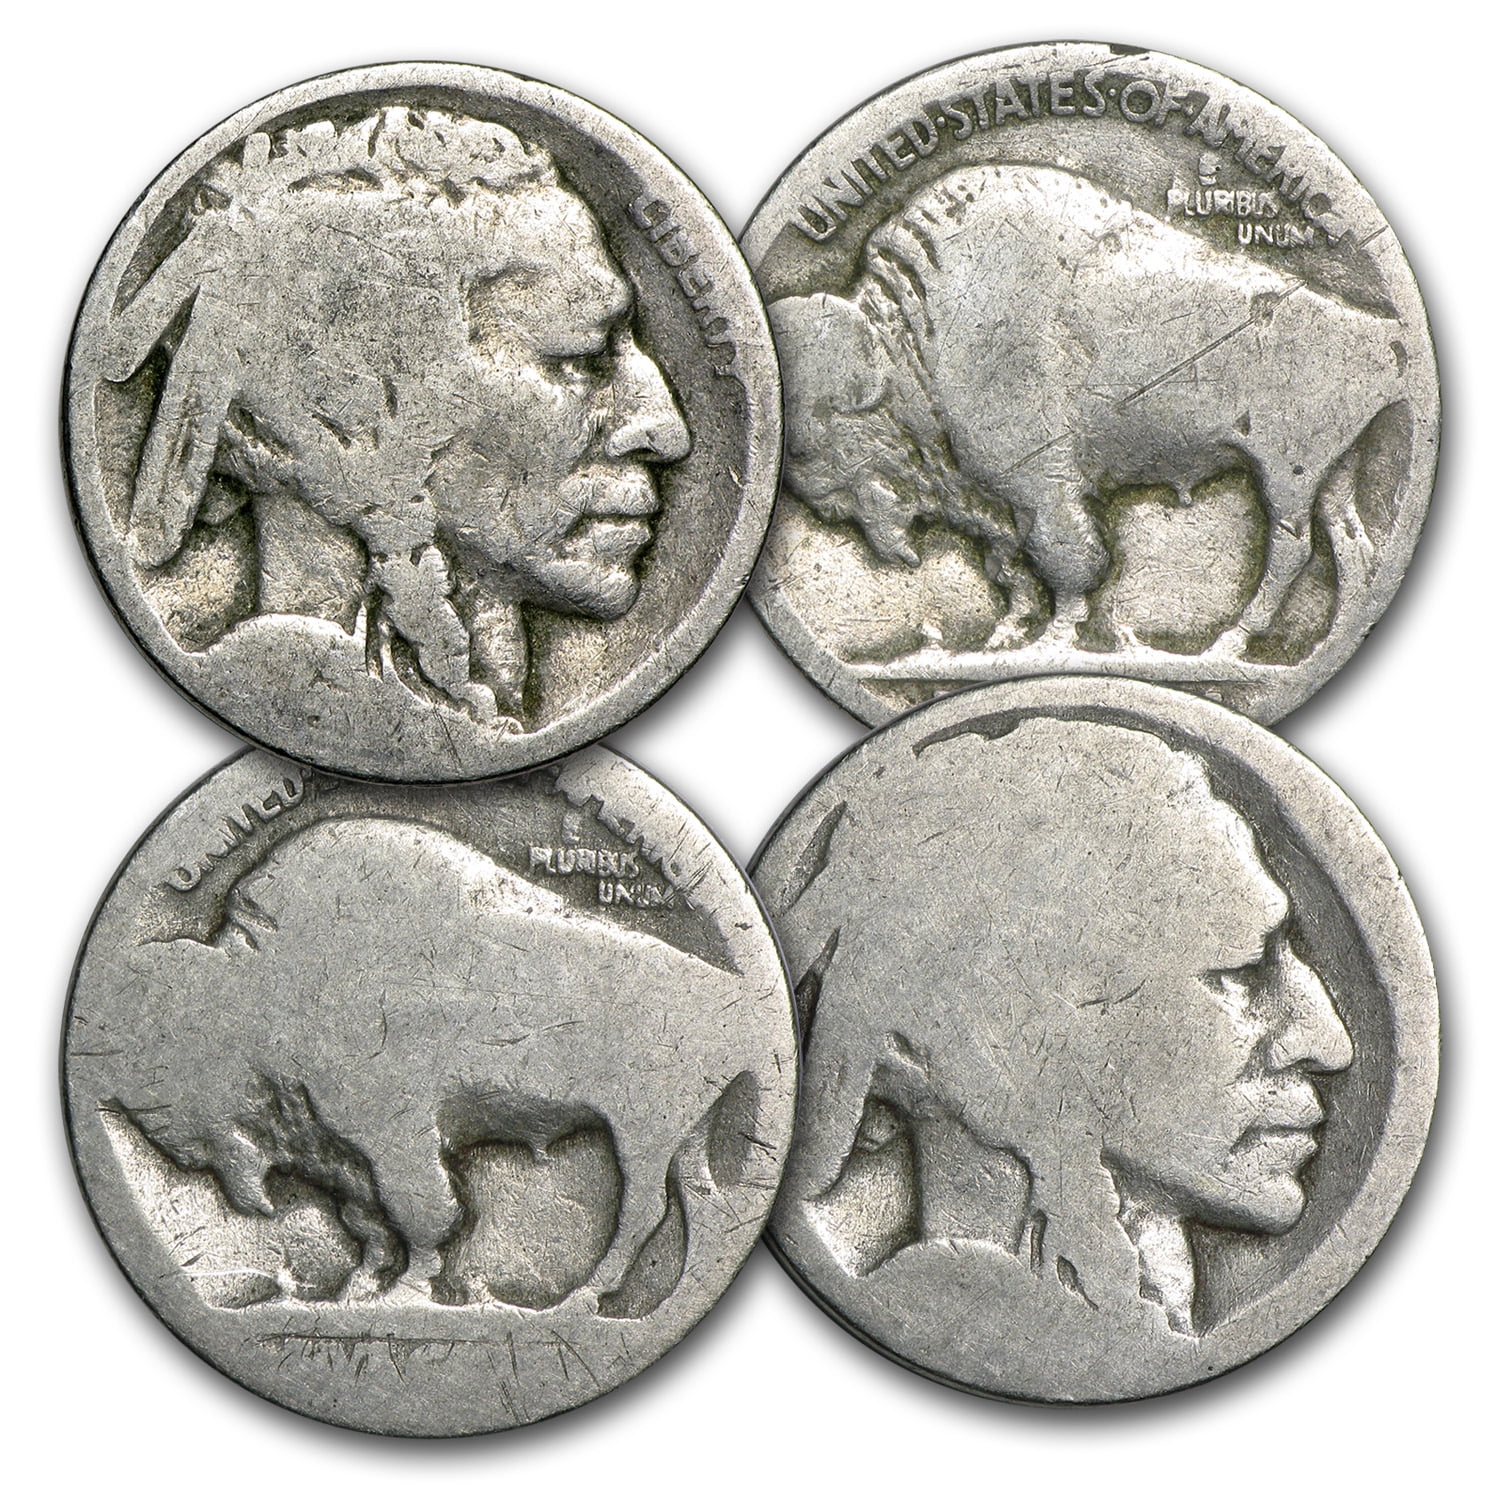 $.05 1913-1938 Buffalo Nickel Classic Indian Head All Different Lot 25 